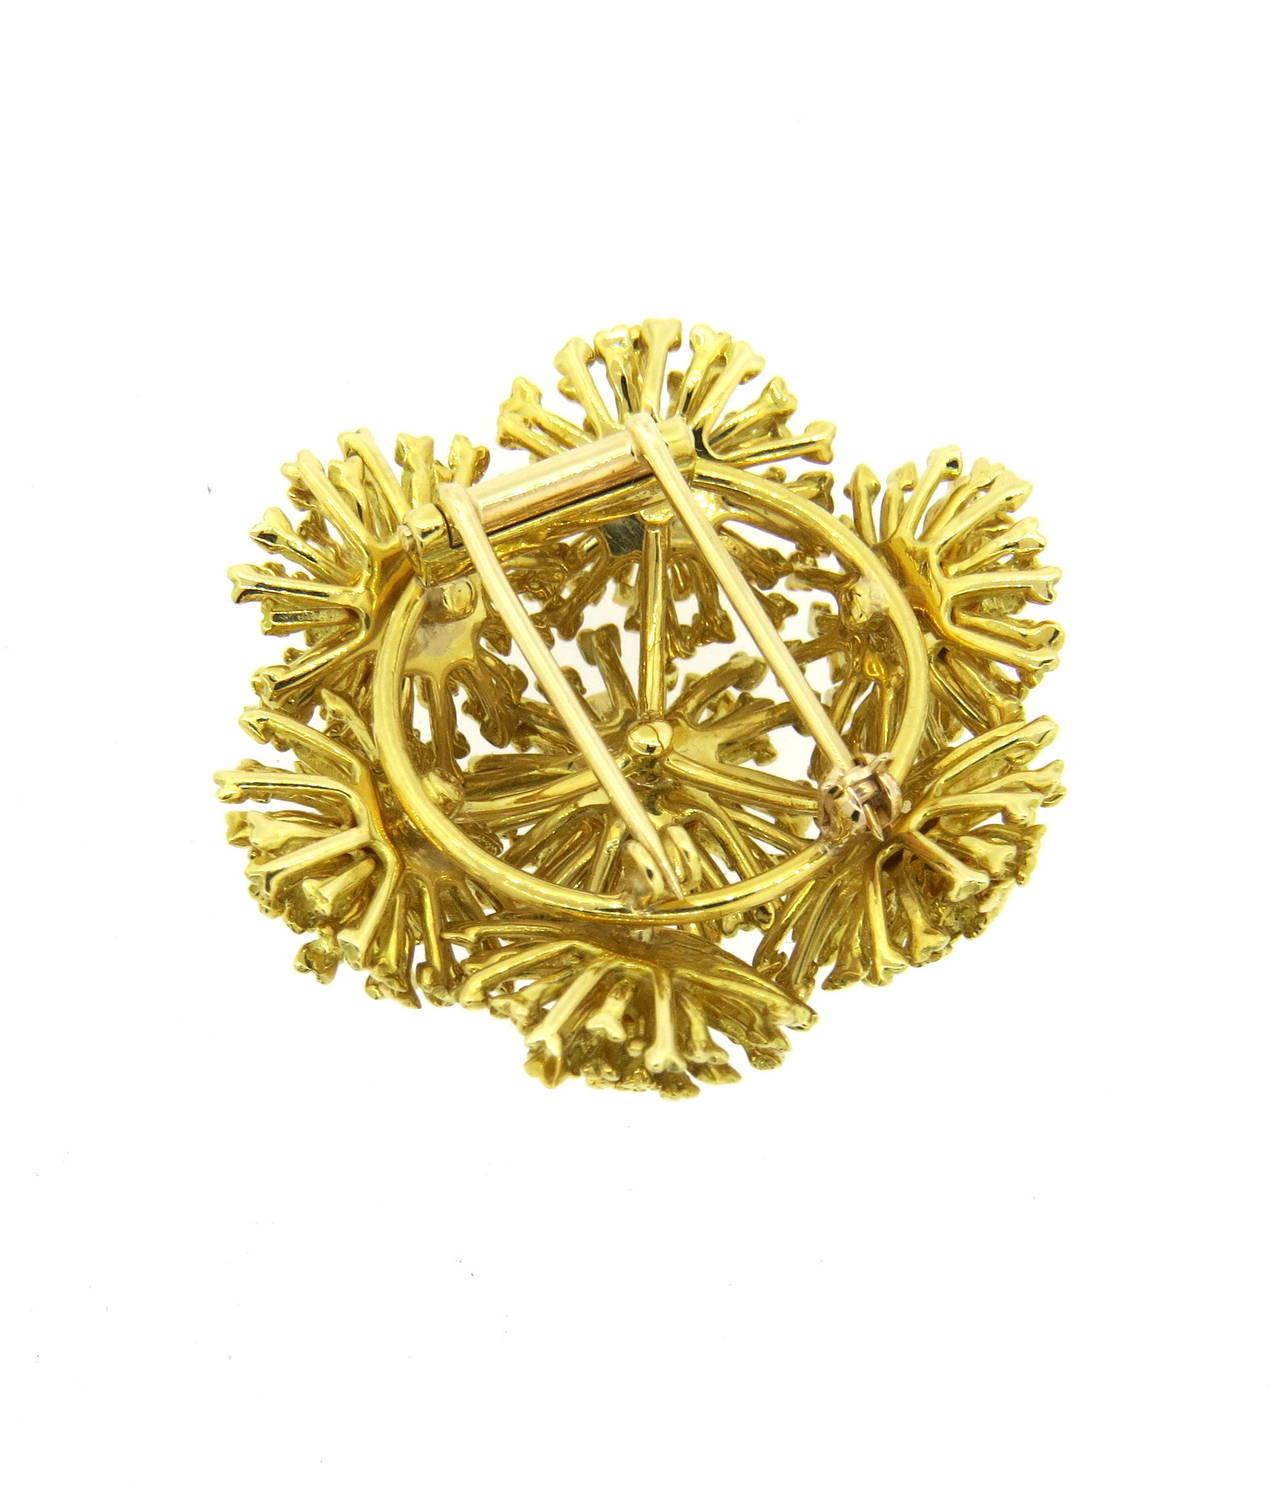 An 18k yellow gold brooch pin crafted by Tiffany & Co.  The brooch measures 40mm x 40mm and weighs 37.2 grams.  Marked Tiffany & Co 18k.